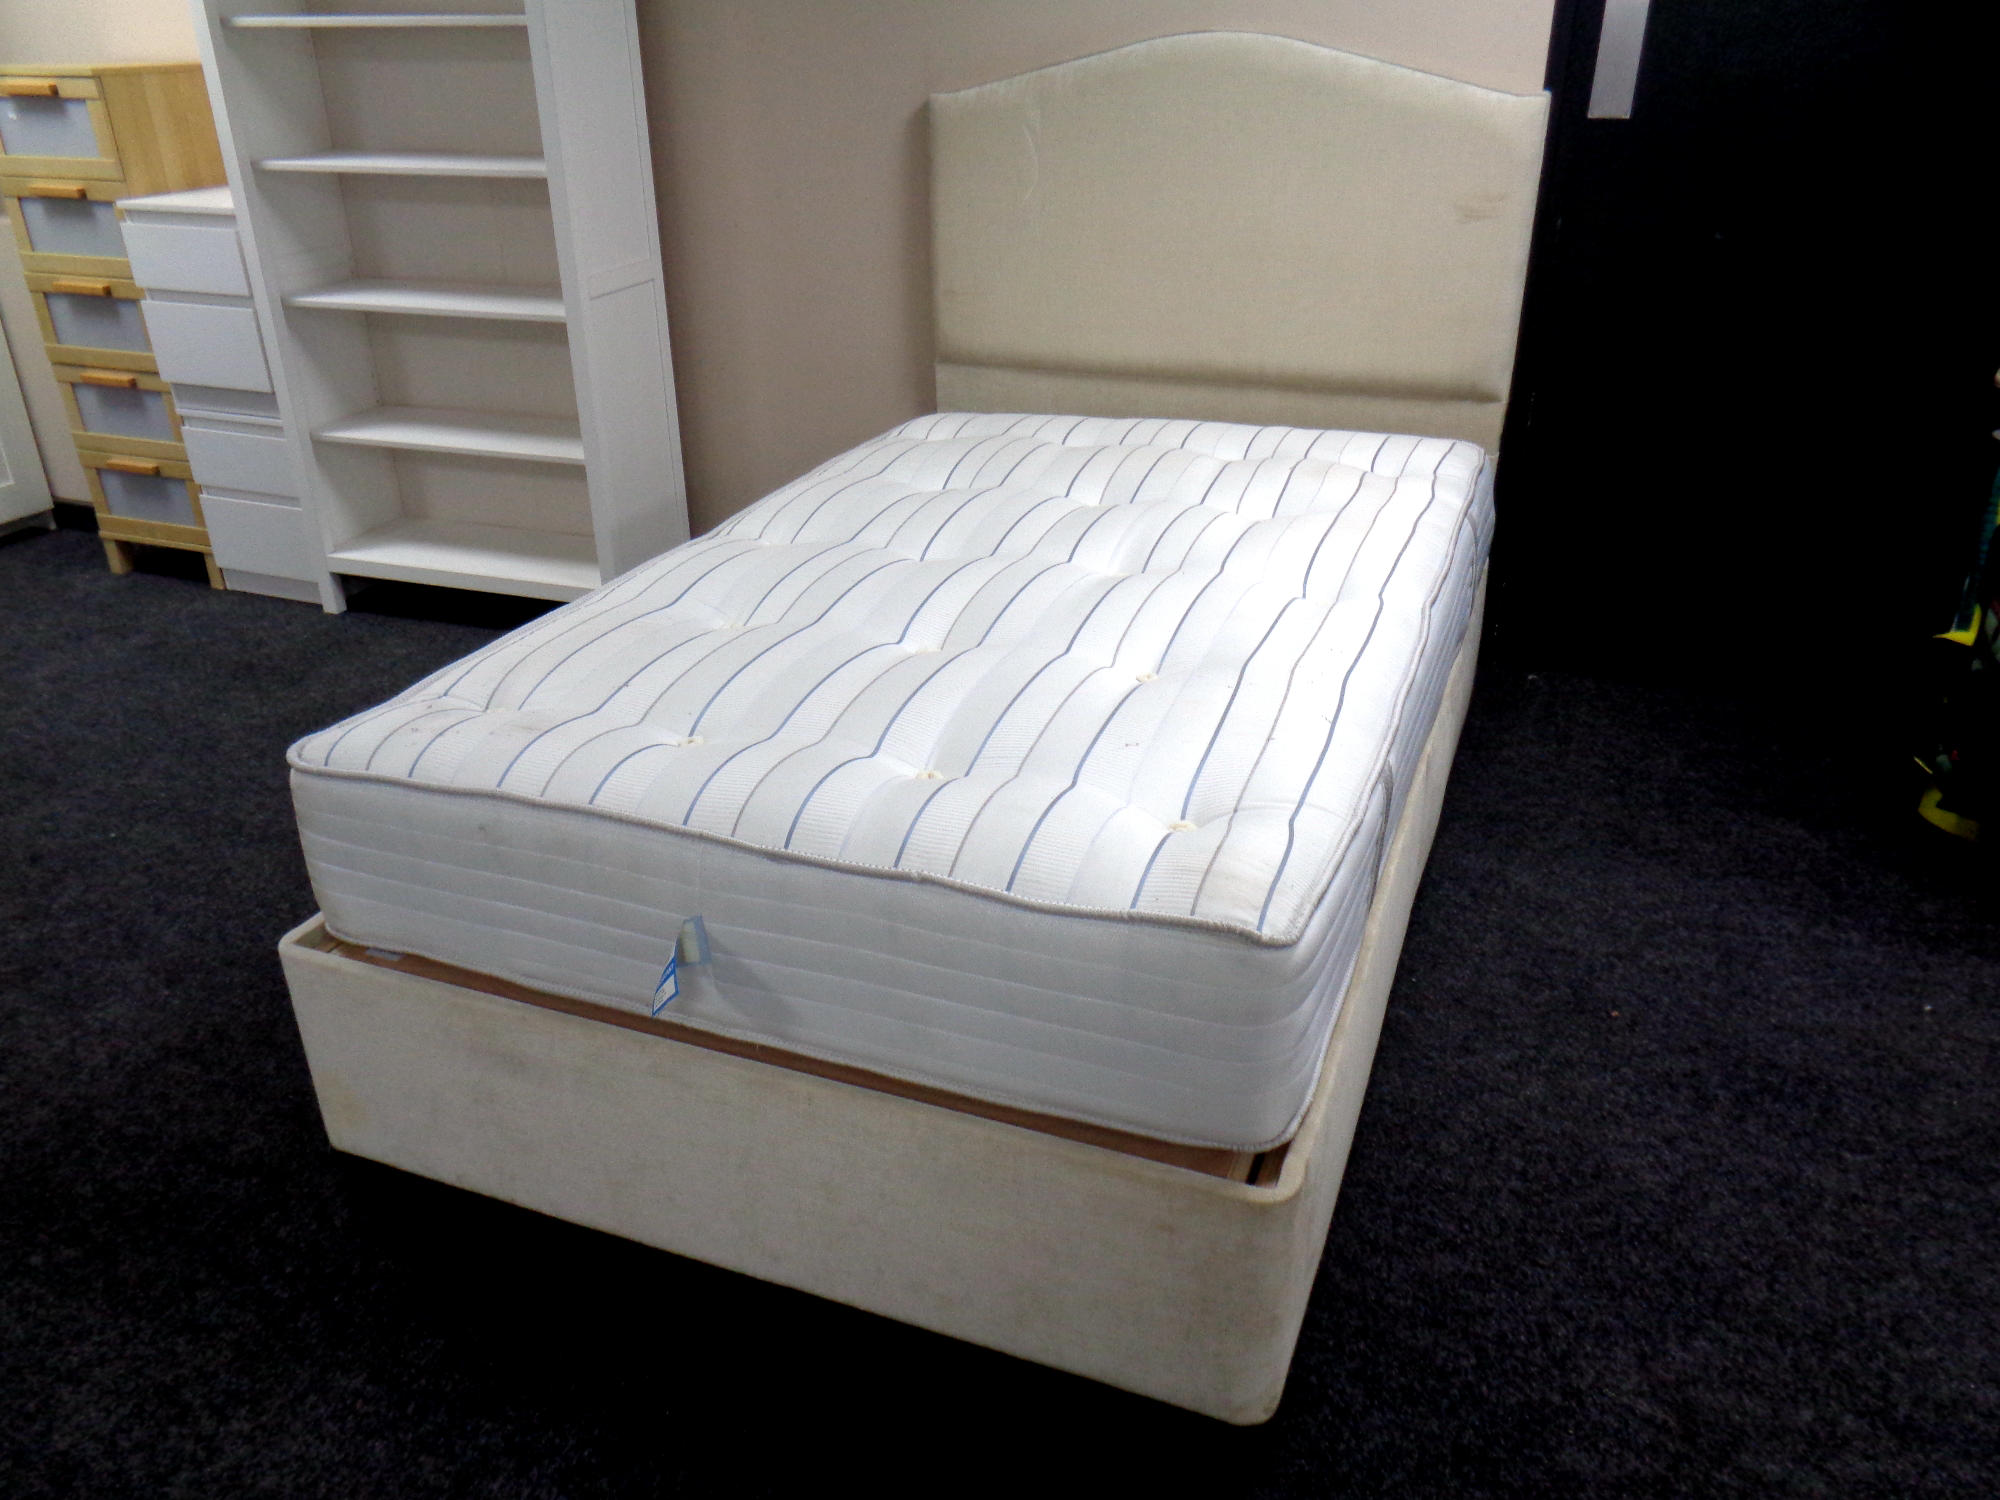 A 4' electric divan and interior with padded headboard